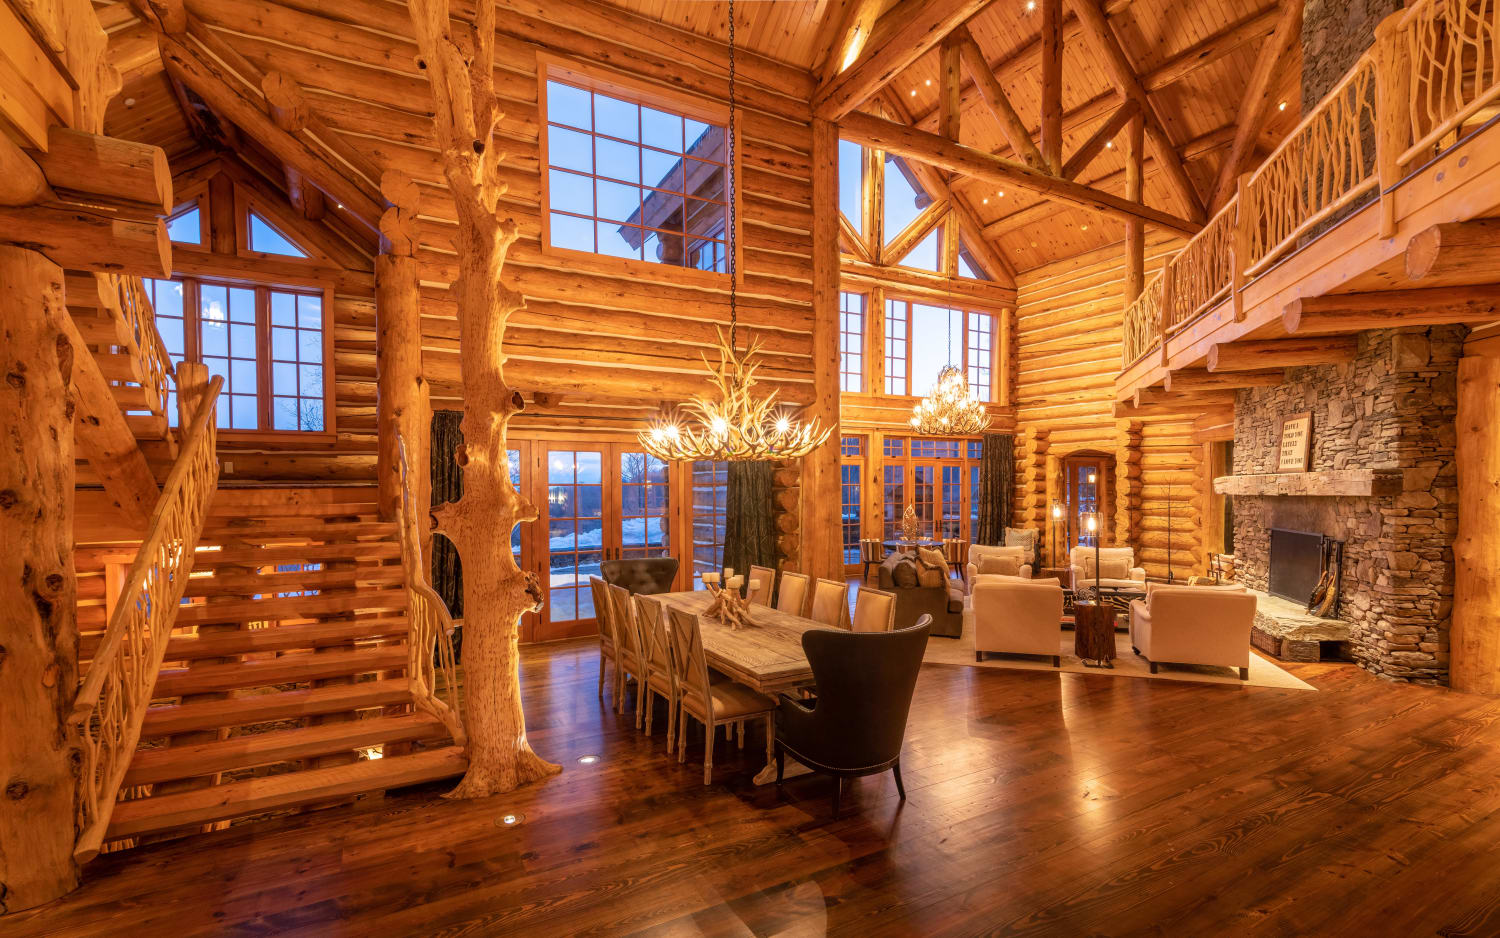 How do people feel about this log cabin design in Vermont?